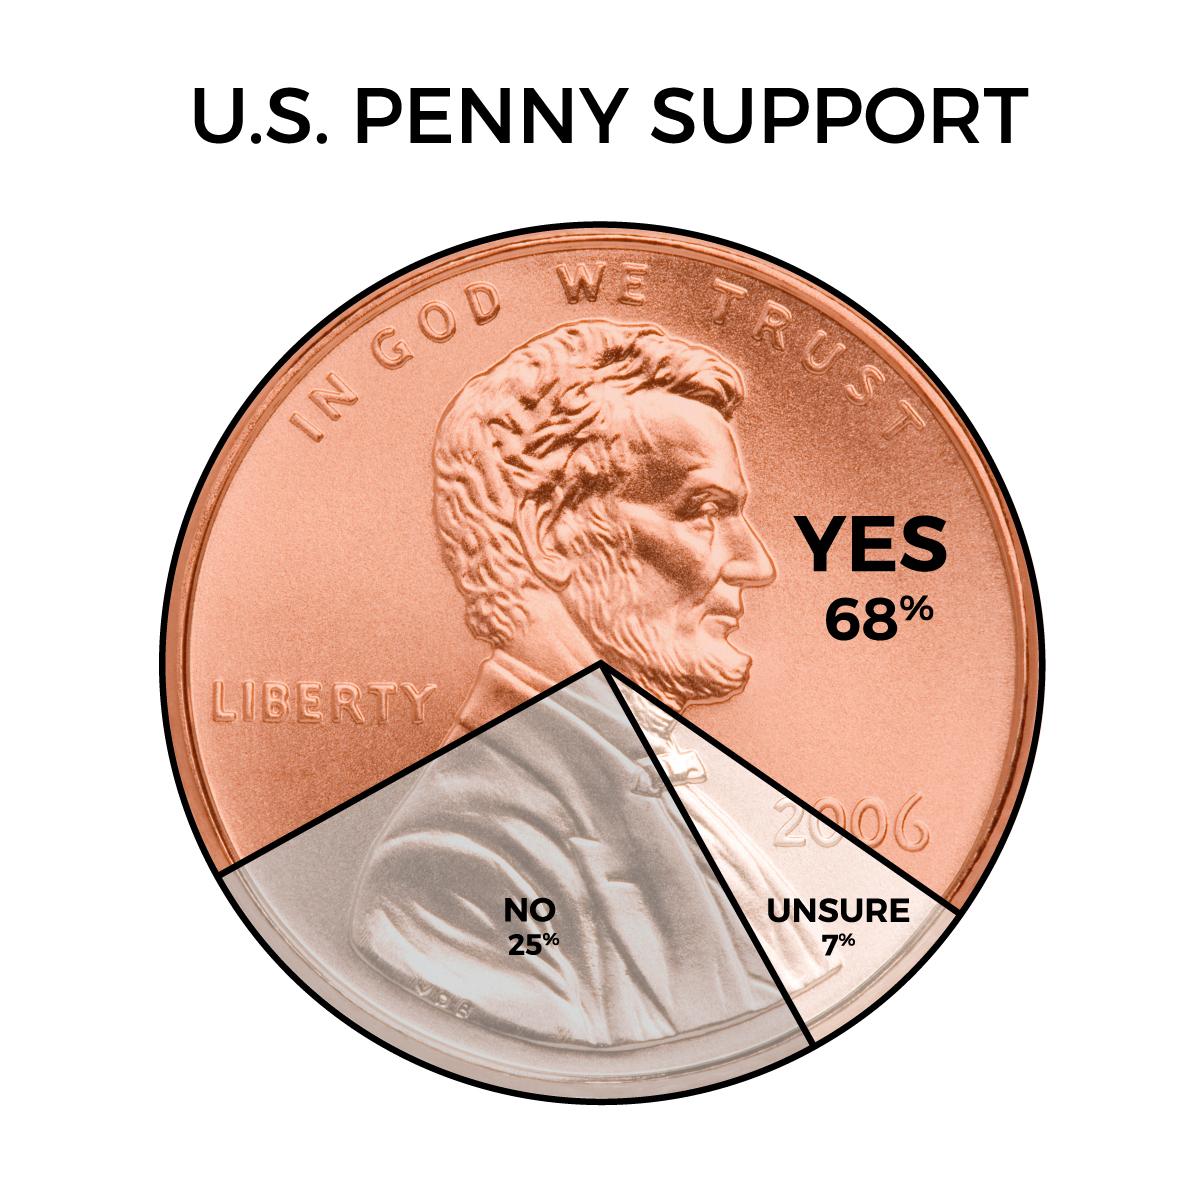 Strong Support for the Penny in Recent Poll | Business Wire